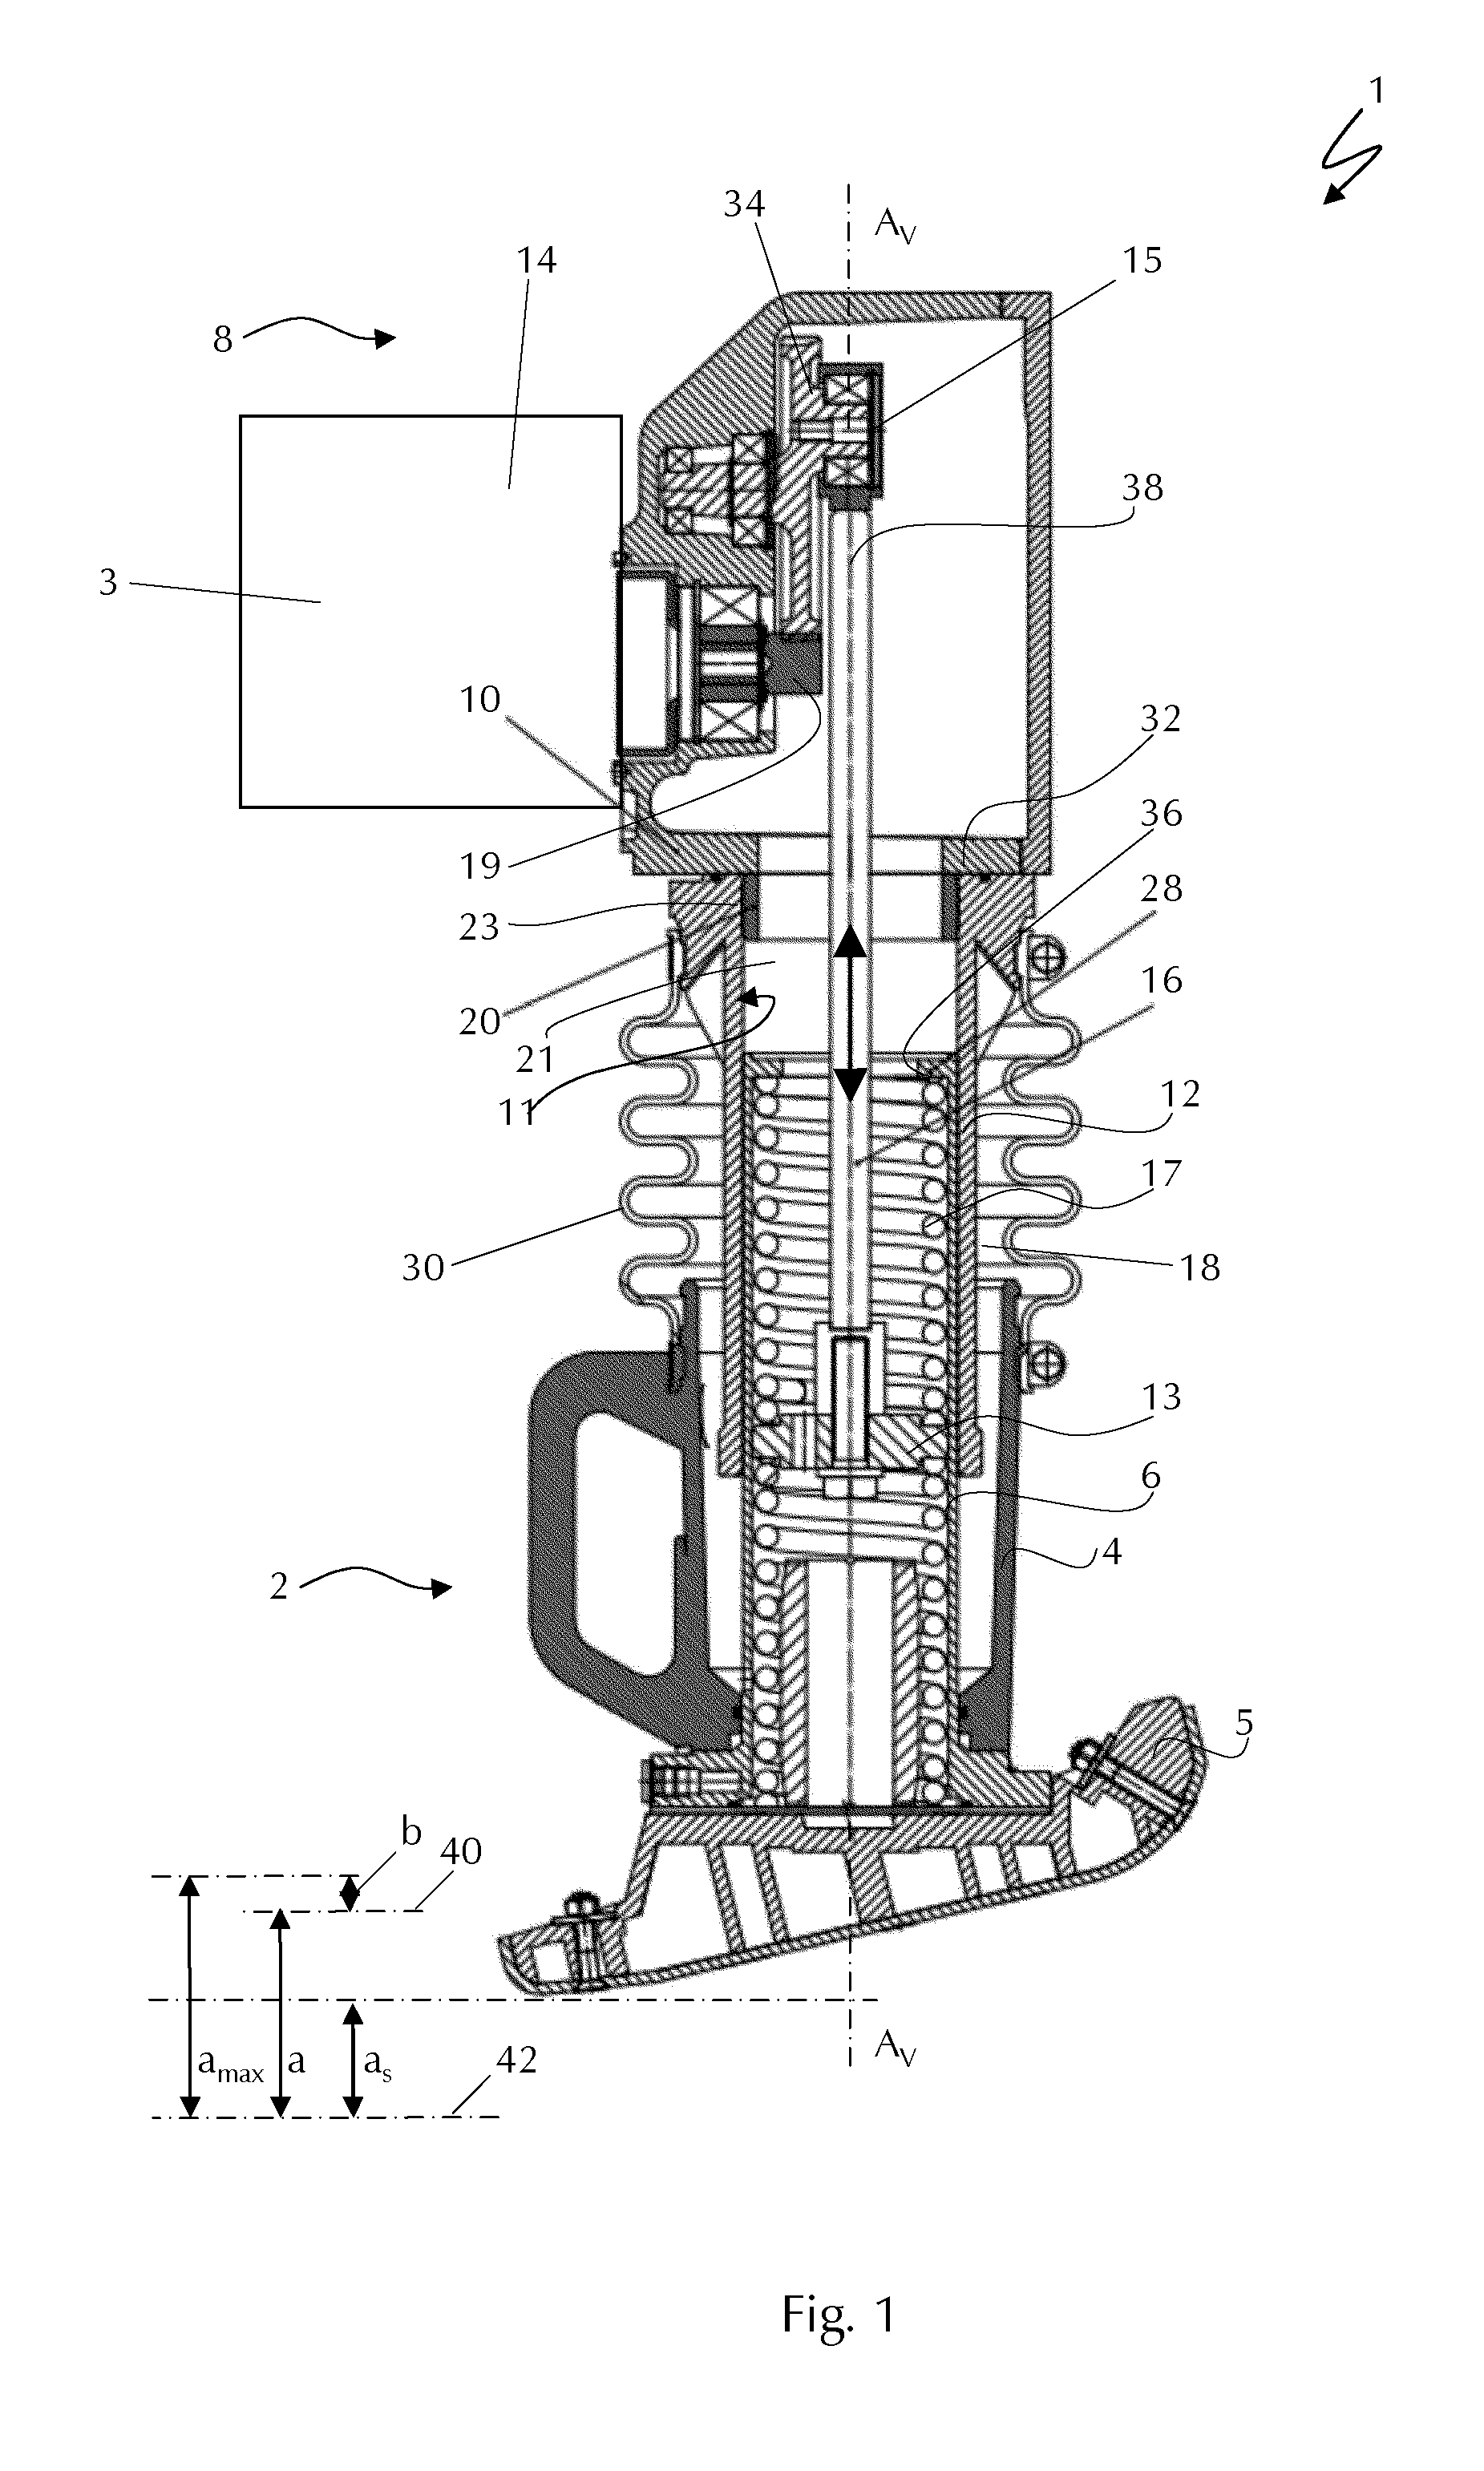 Apparatus for soil compaction